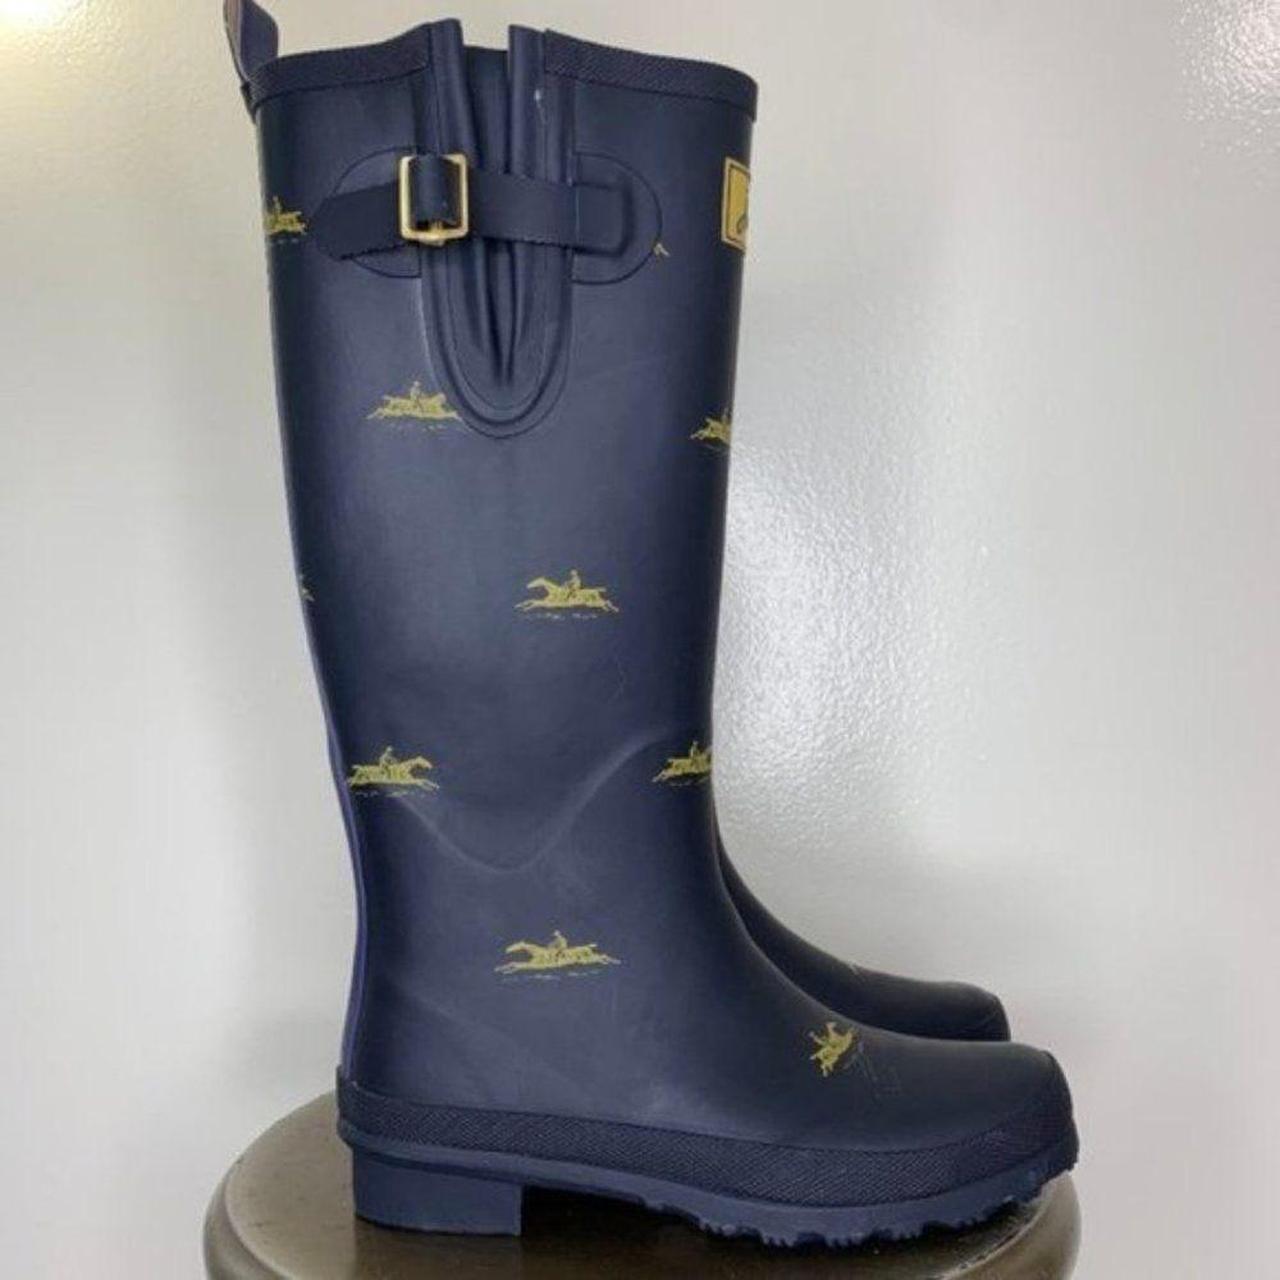 Joules Women's Blue and Yellow Boots